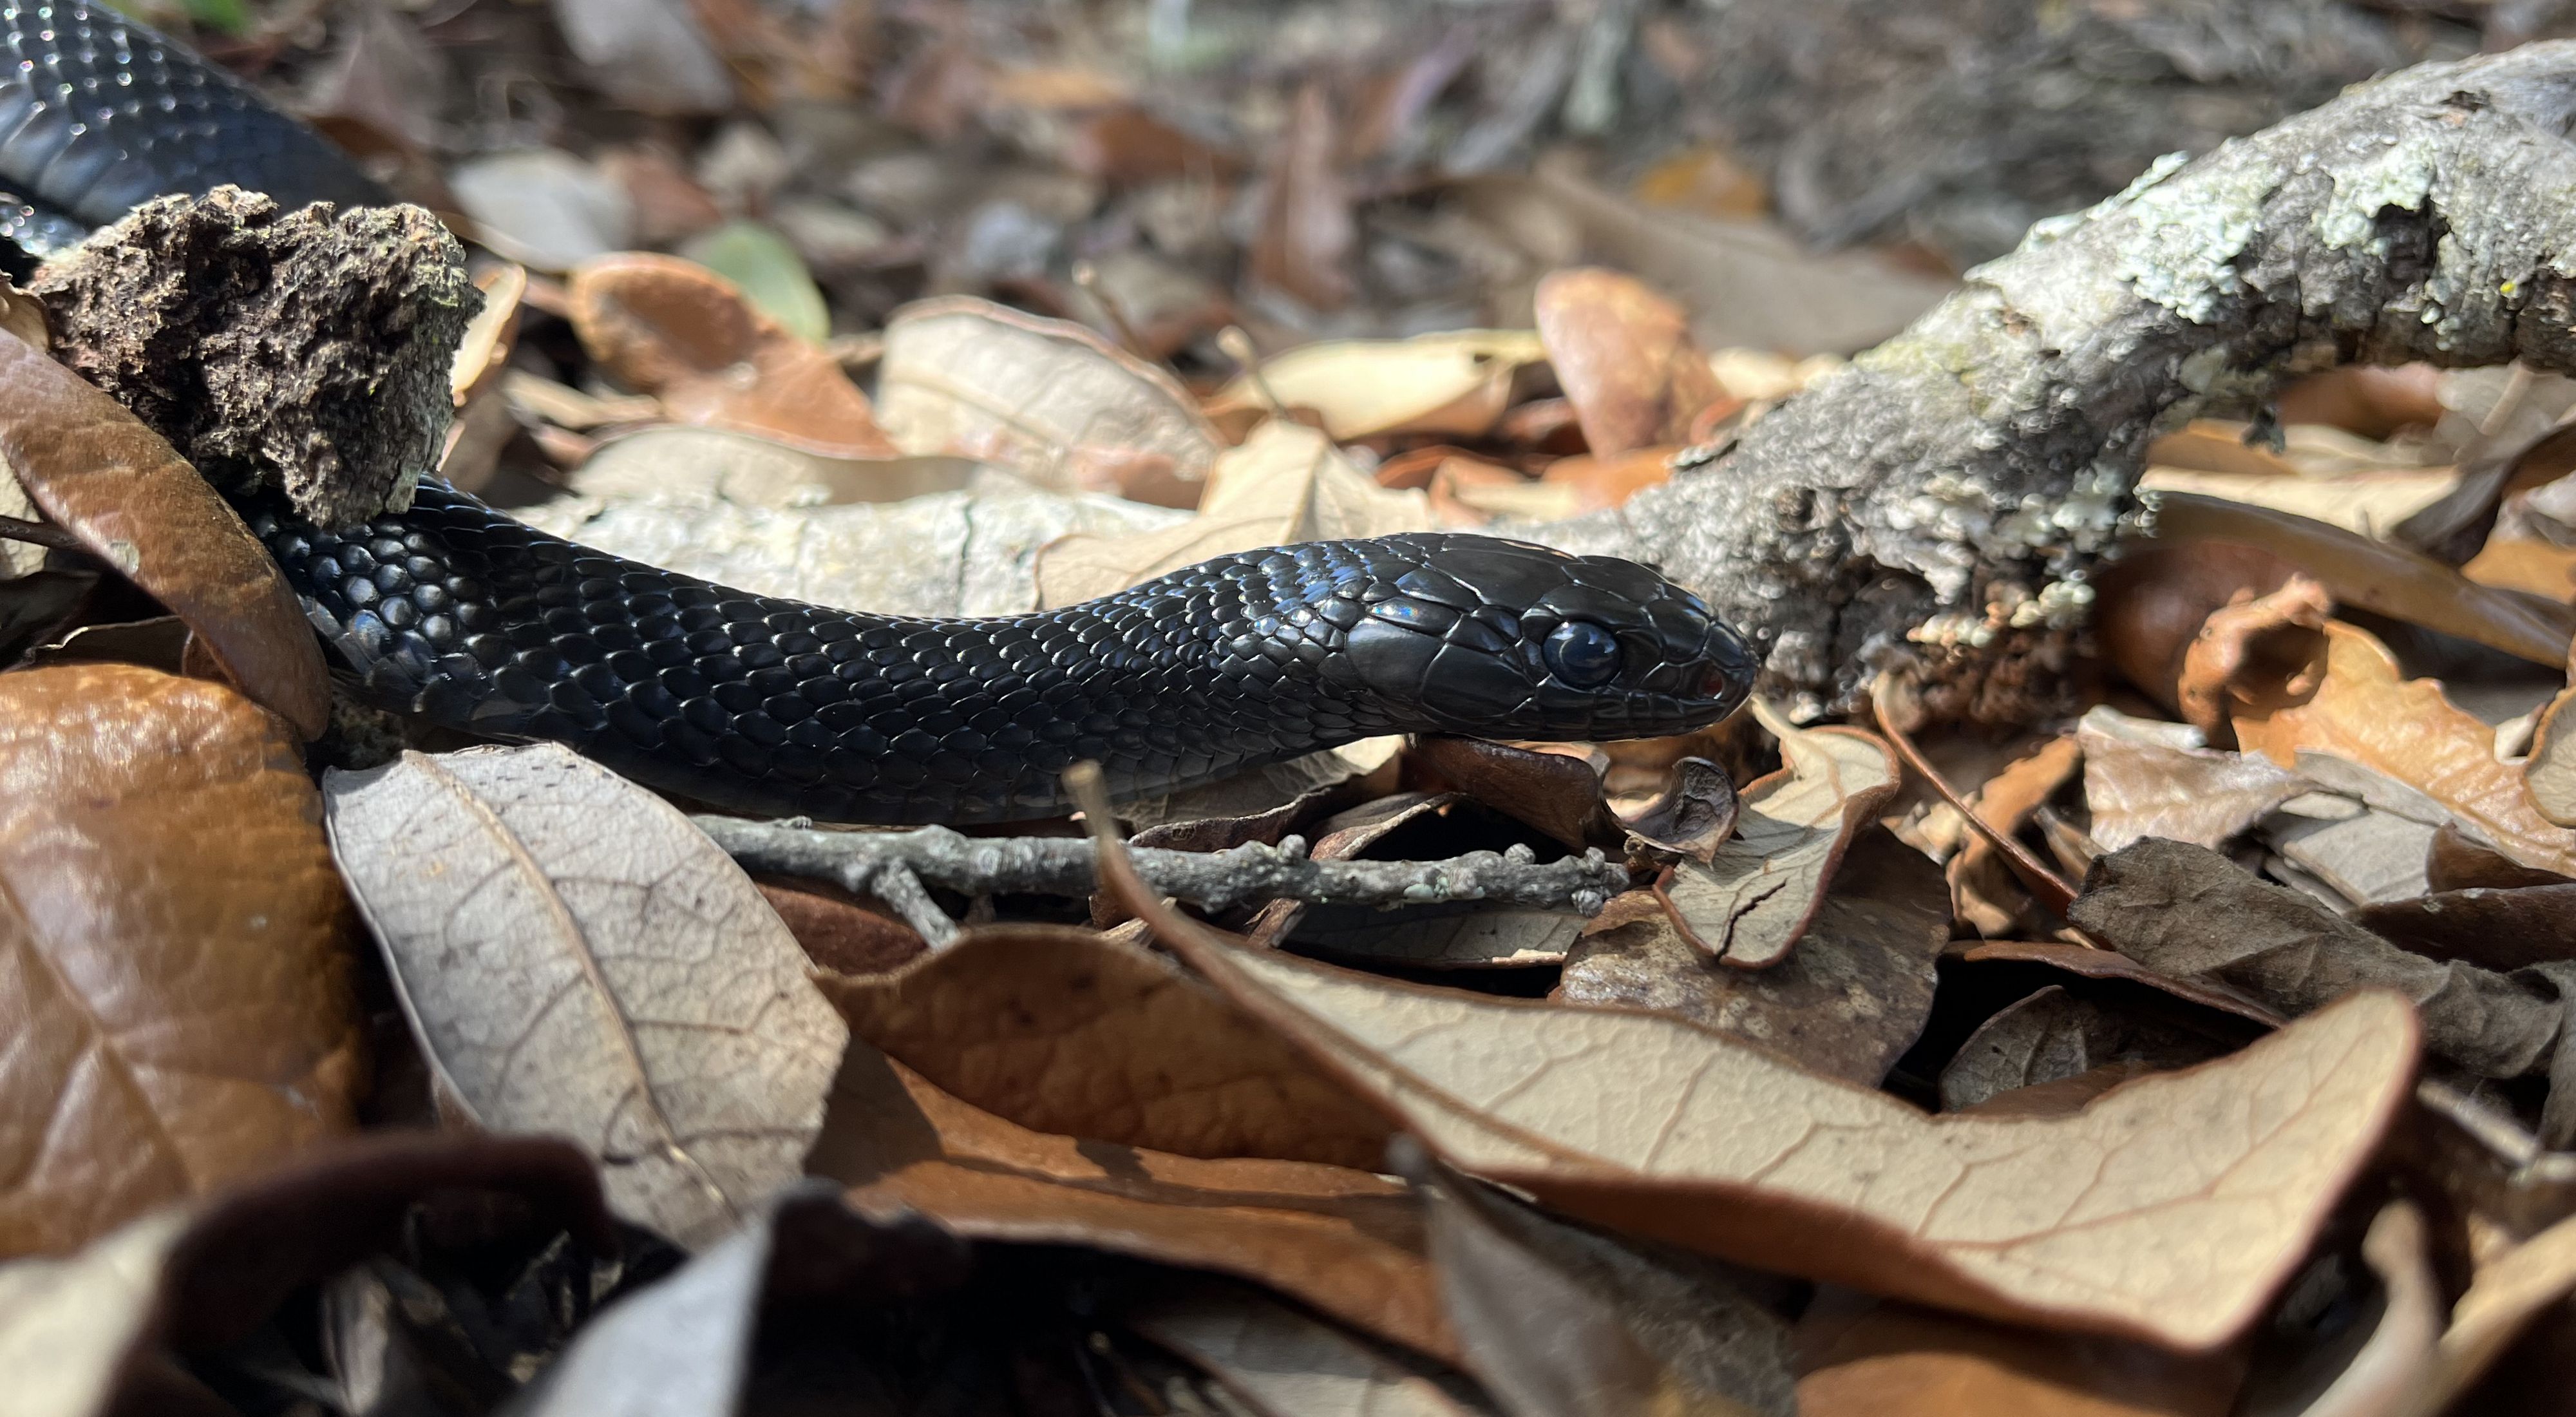 Closeup of a shiny black snake slithering across dried leaves.